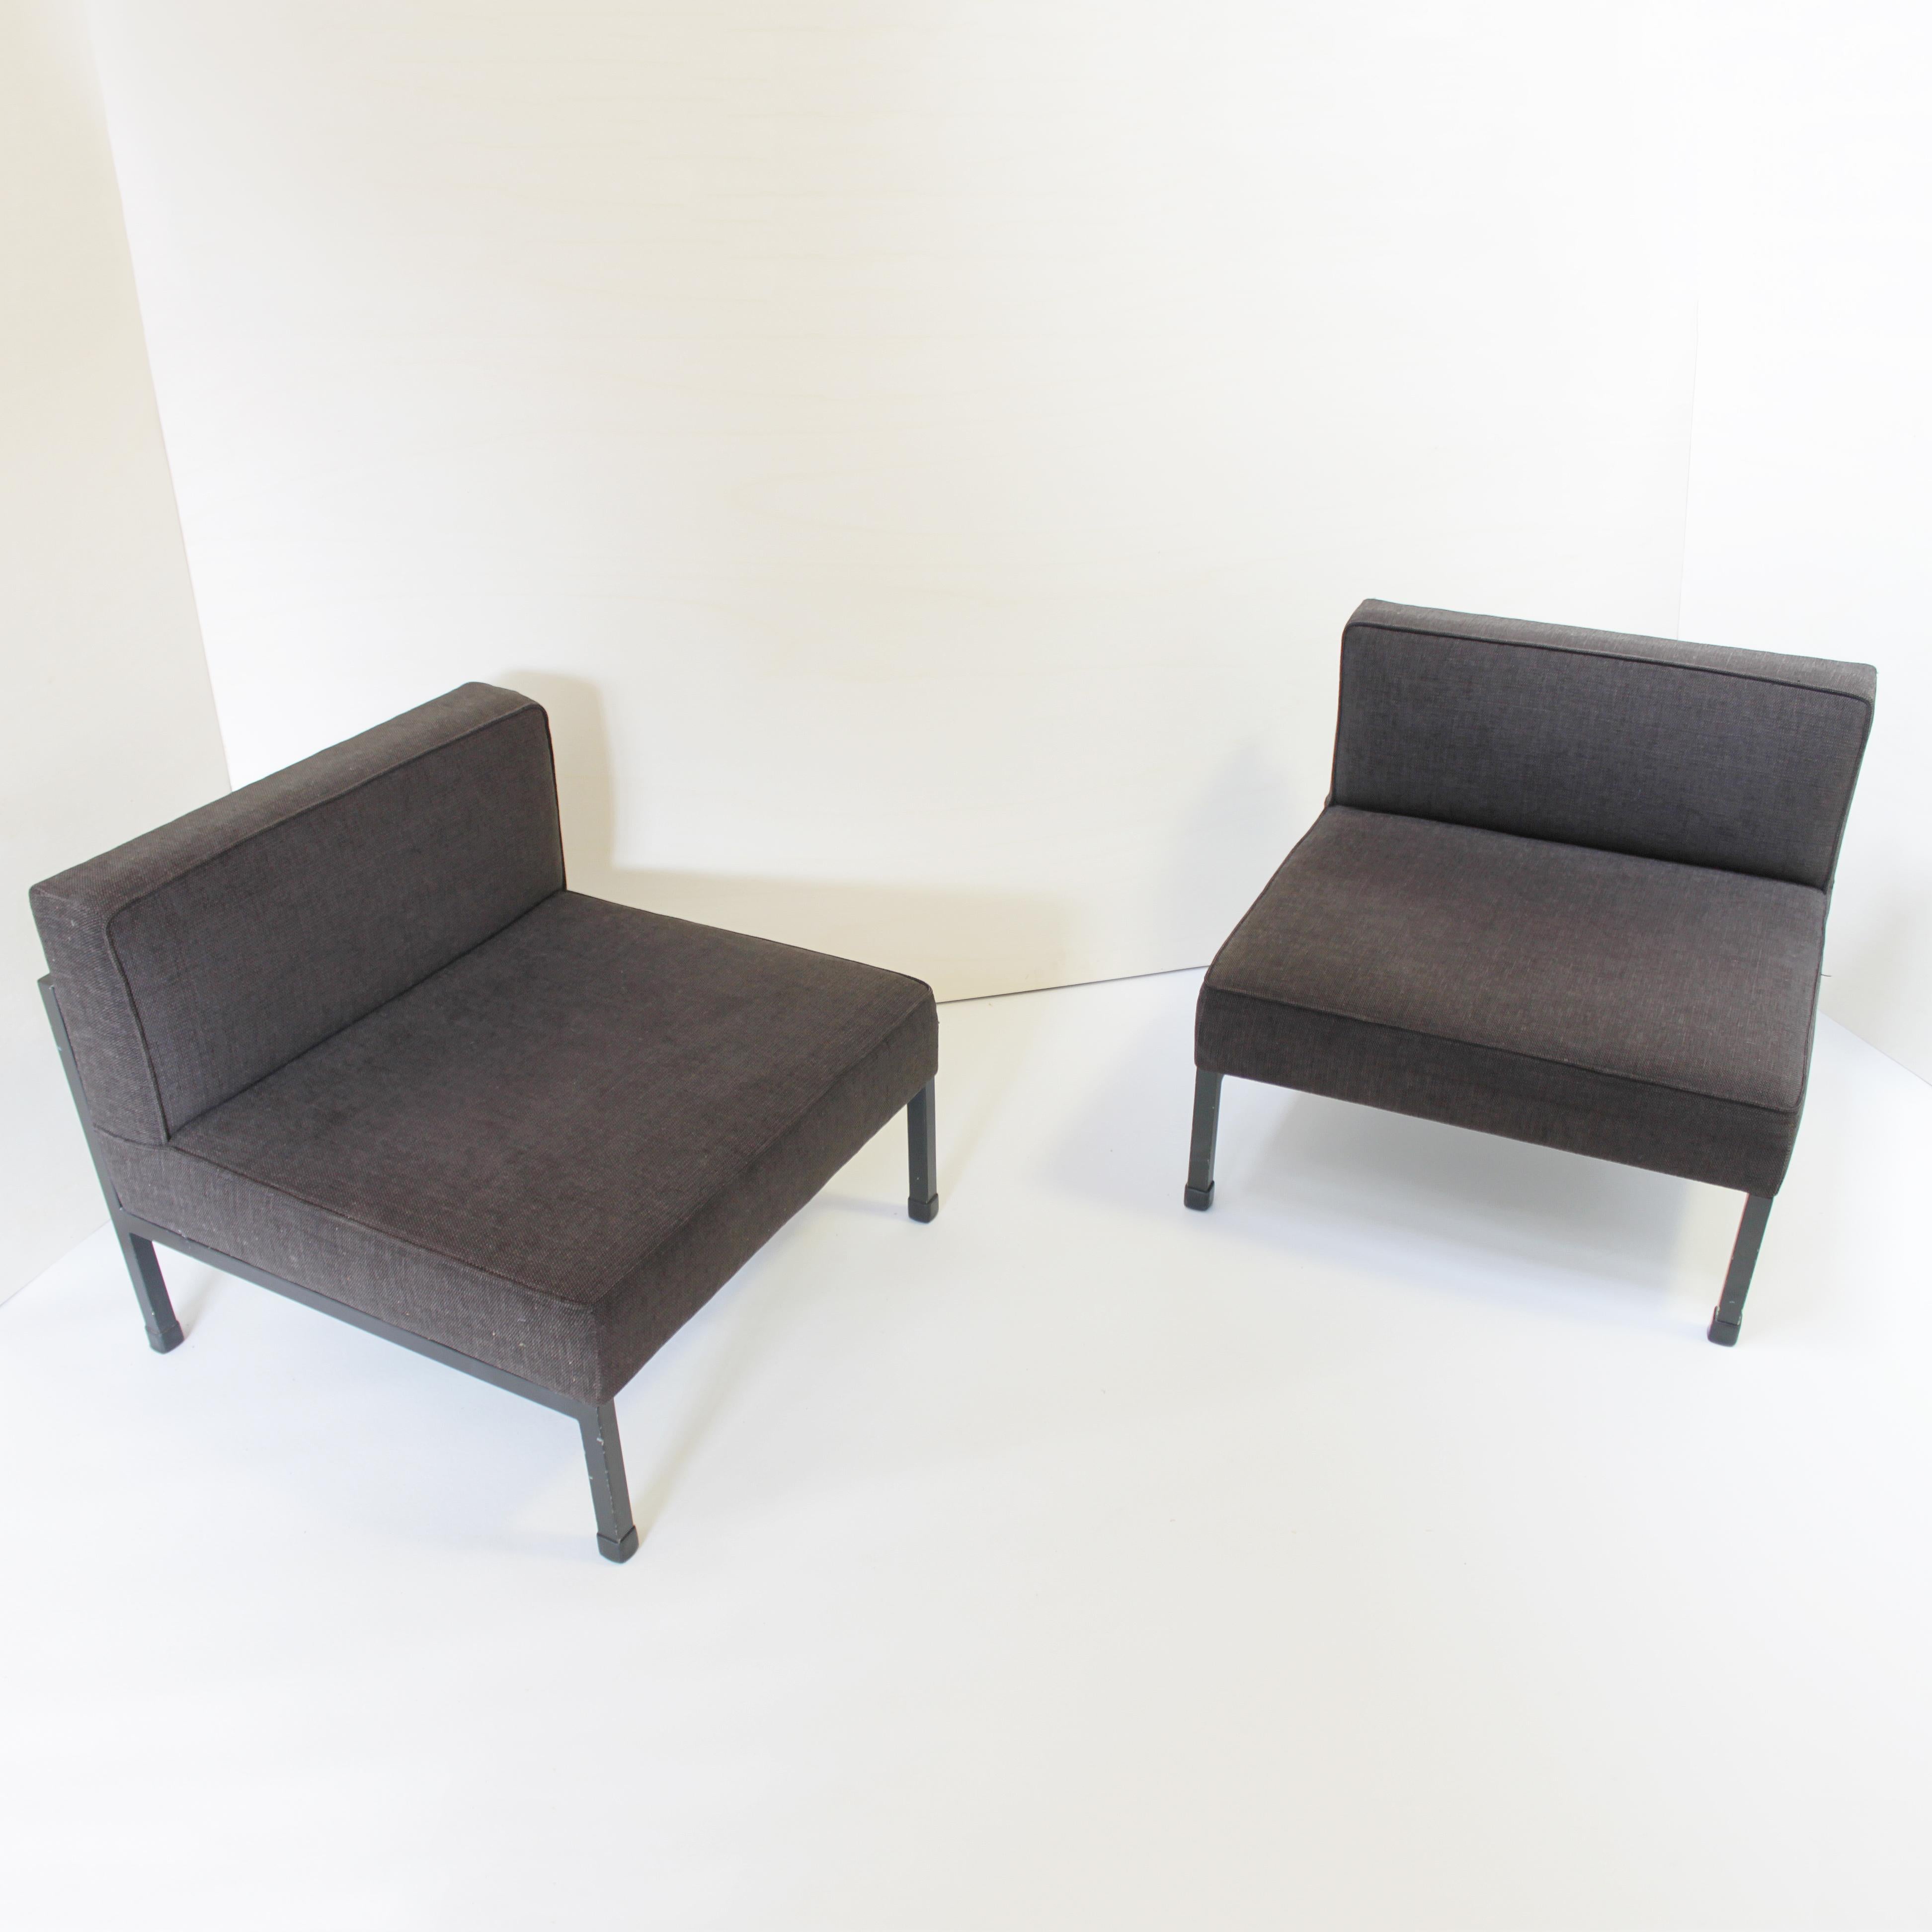 Coffee Table and Two '2' Armchairs by Wim Den Boon, Netherlands, 1958 For Sale 4